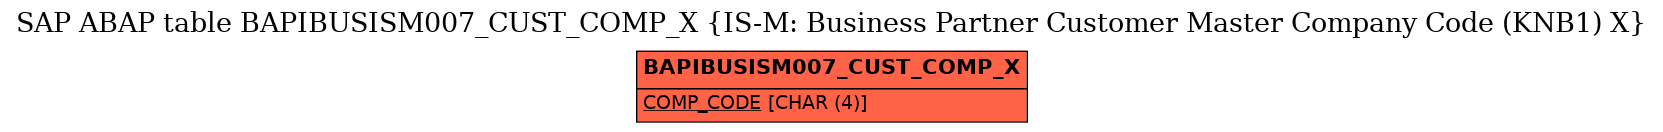 E-R Diagram for table BAPIBUSISM007_CUST_COMP_X (IS-M: Business Partner Customer Master Company Code (KNB1) X)